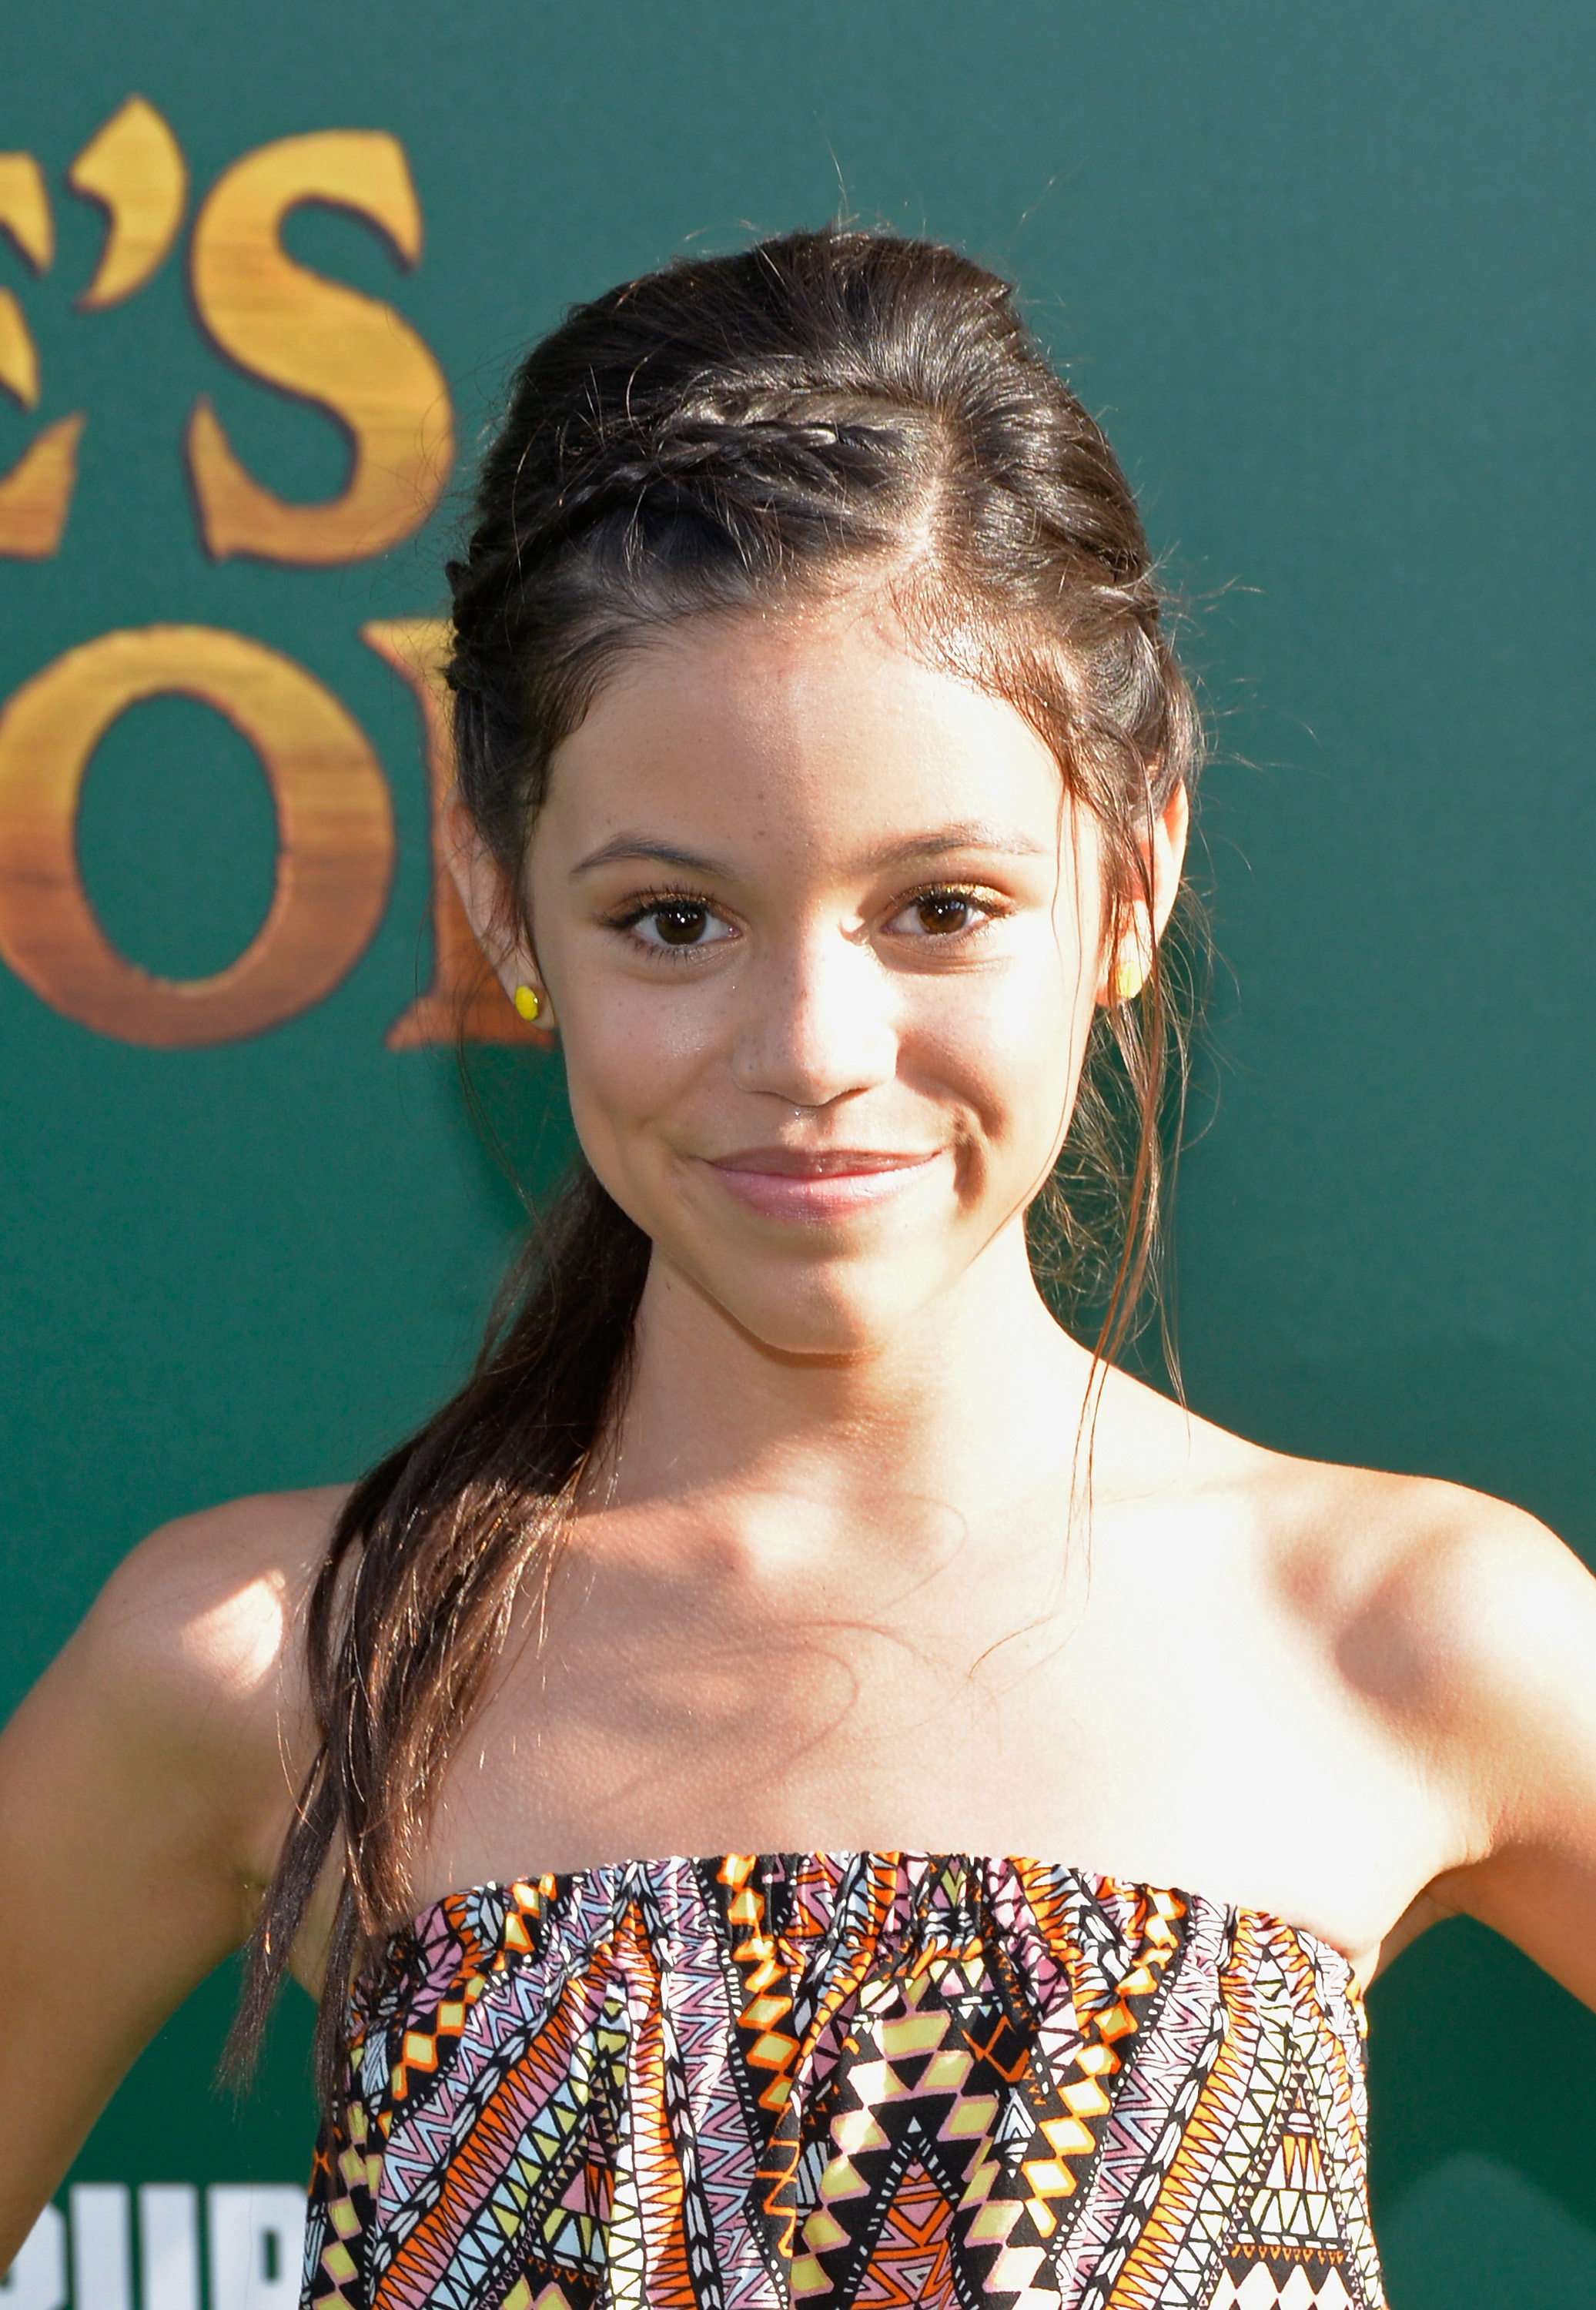 Close-up of Jenna as a child at a media event in a strapless print outfit